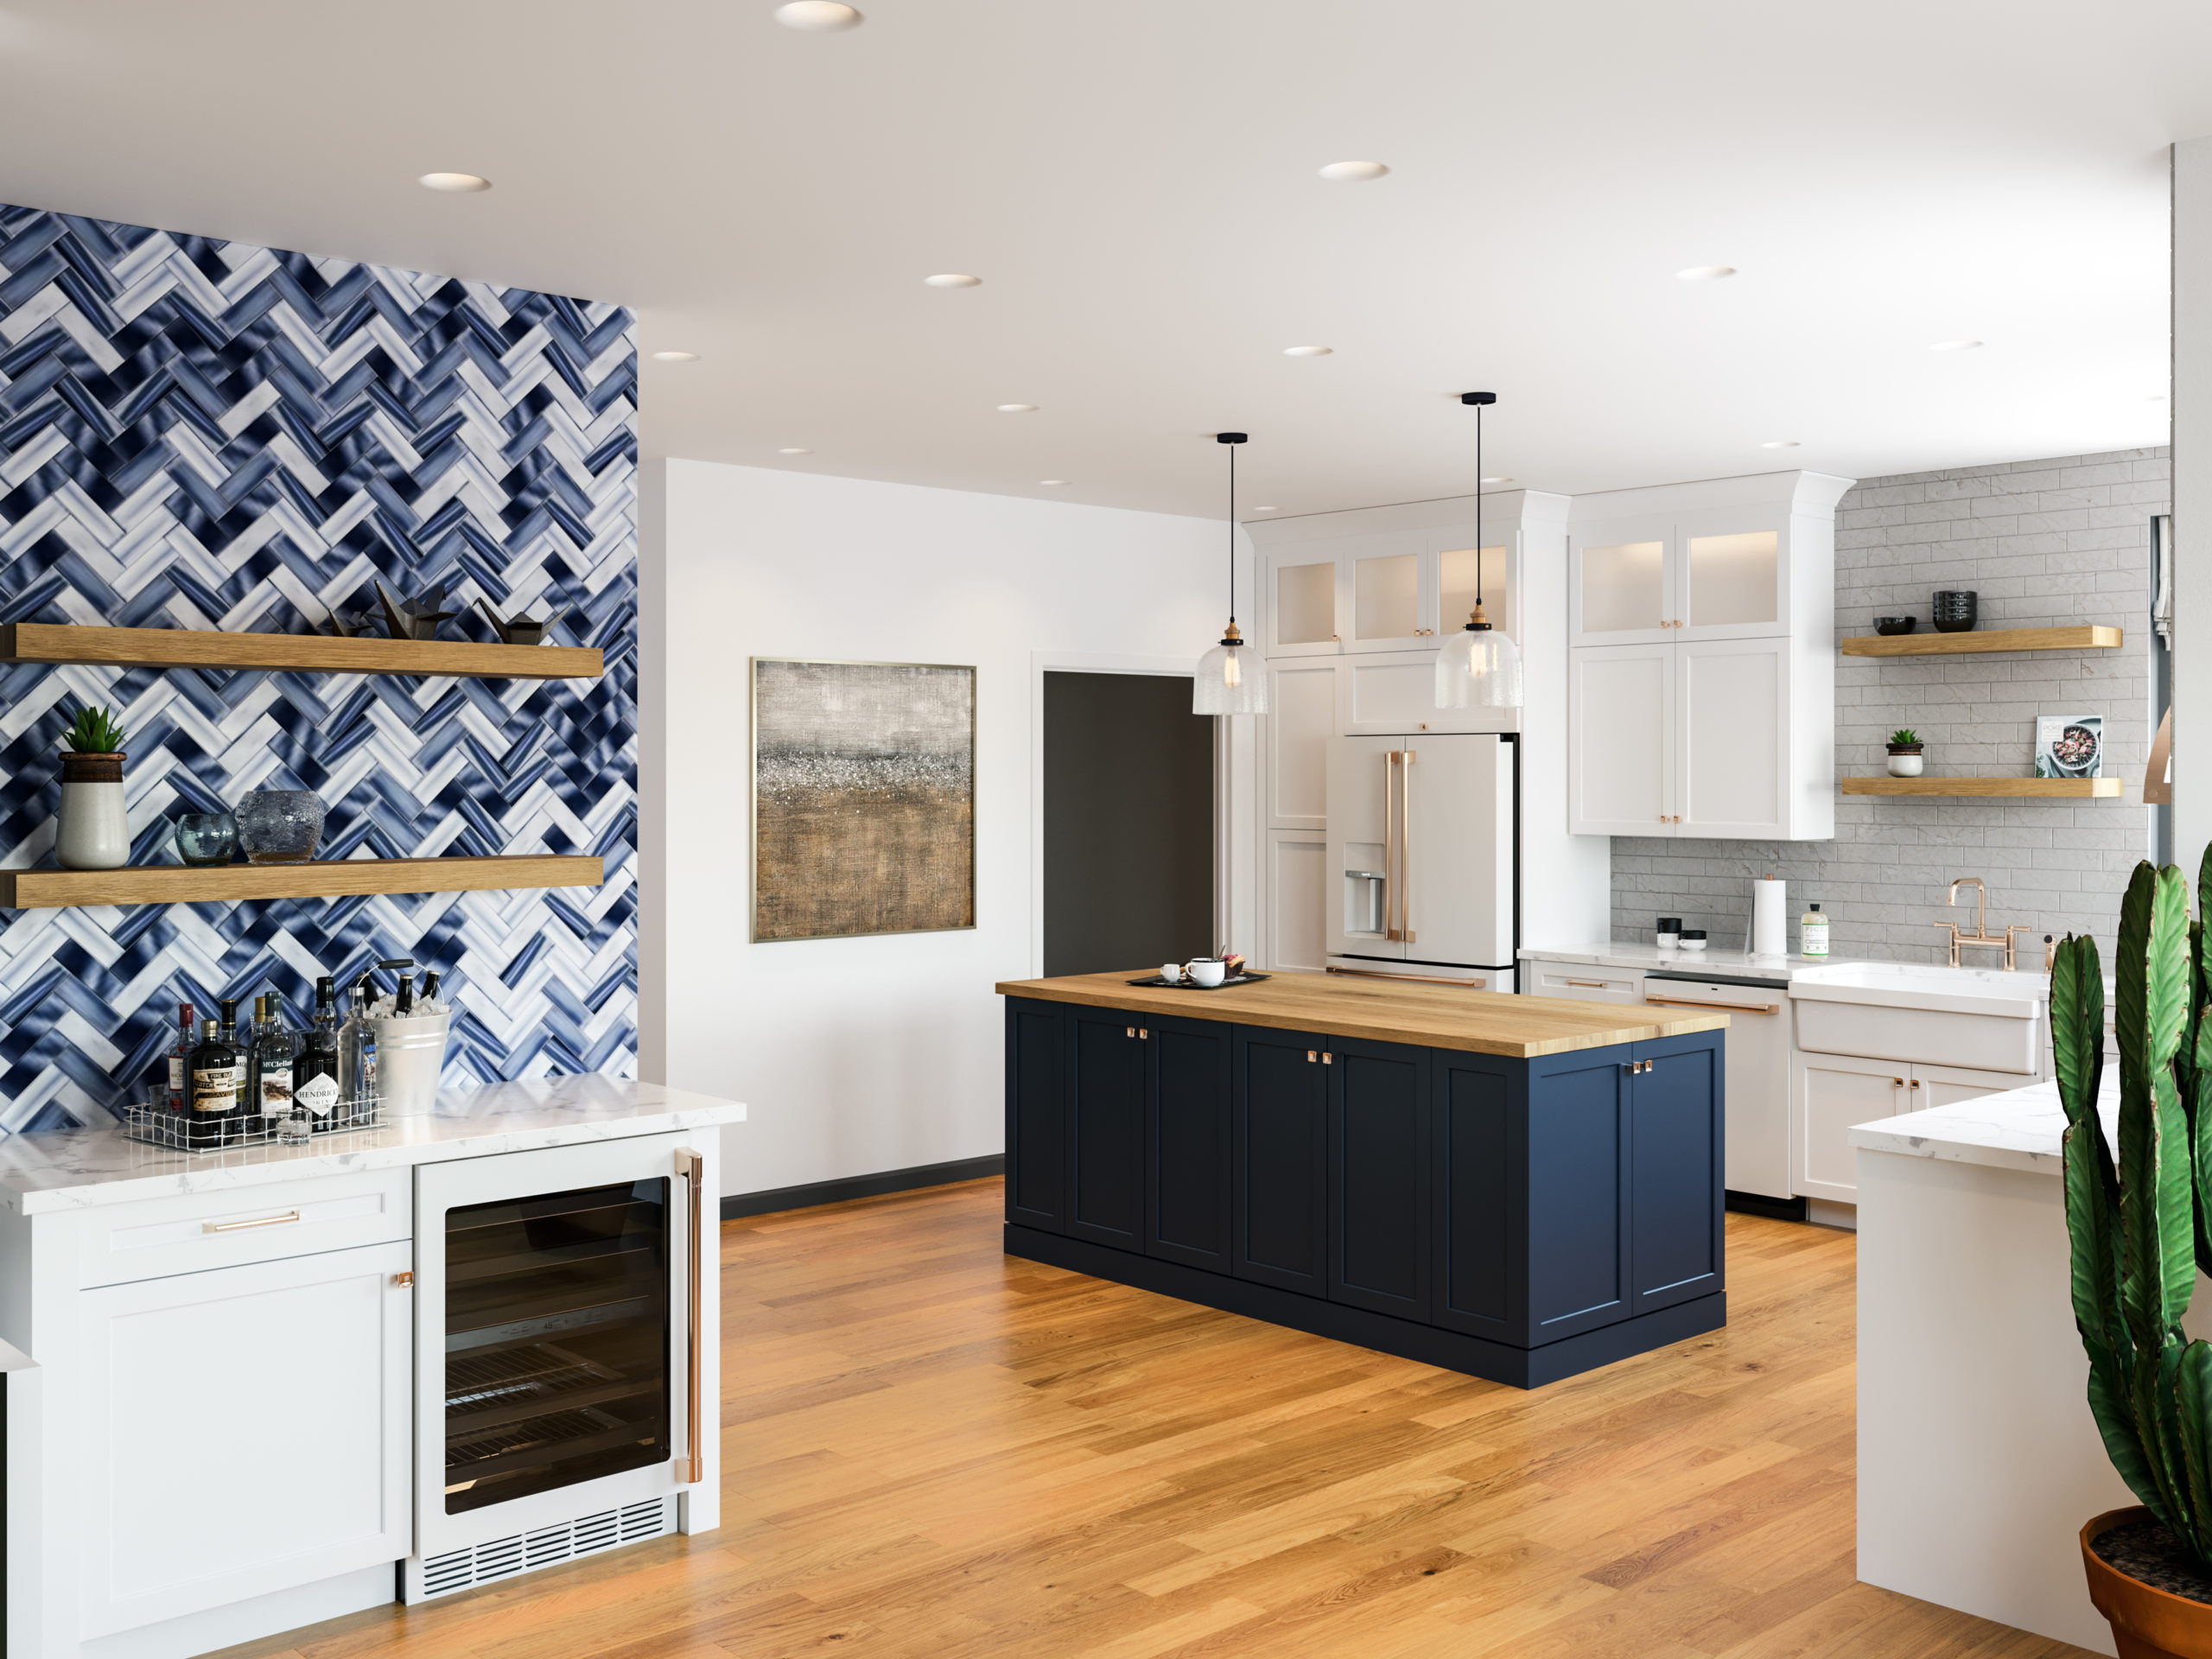 Remodel Review: Waypoint vs. Dura Supreme Cabinetry